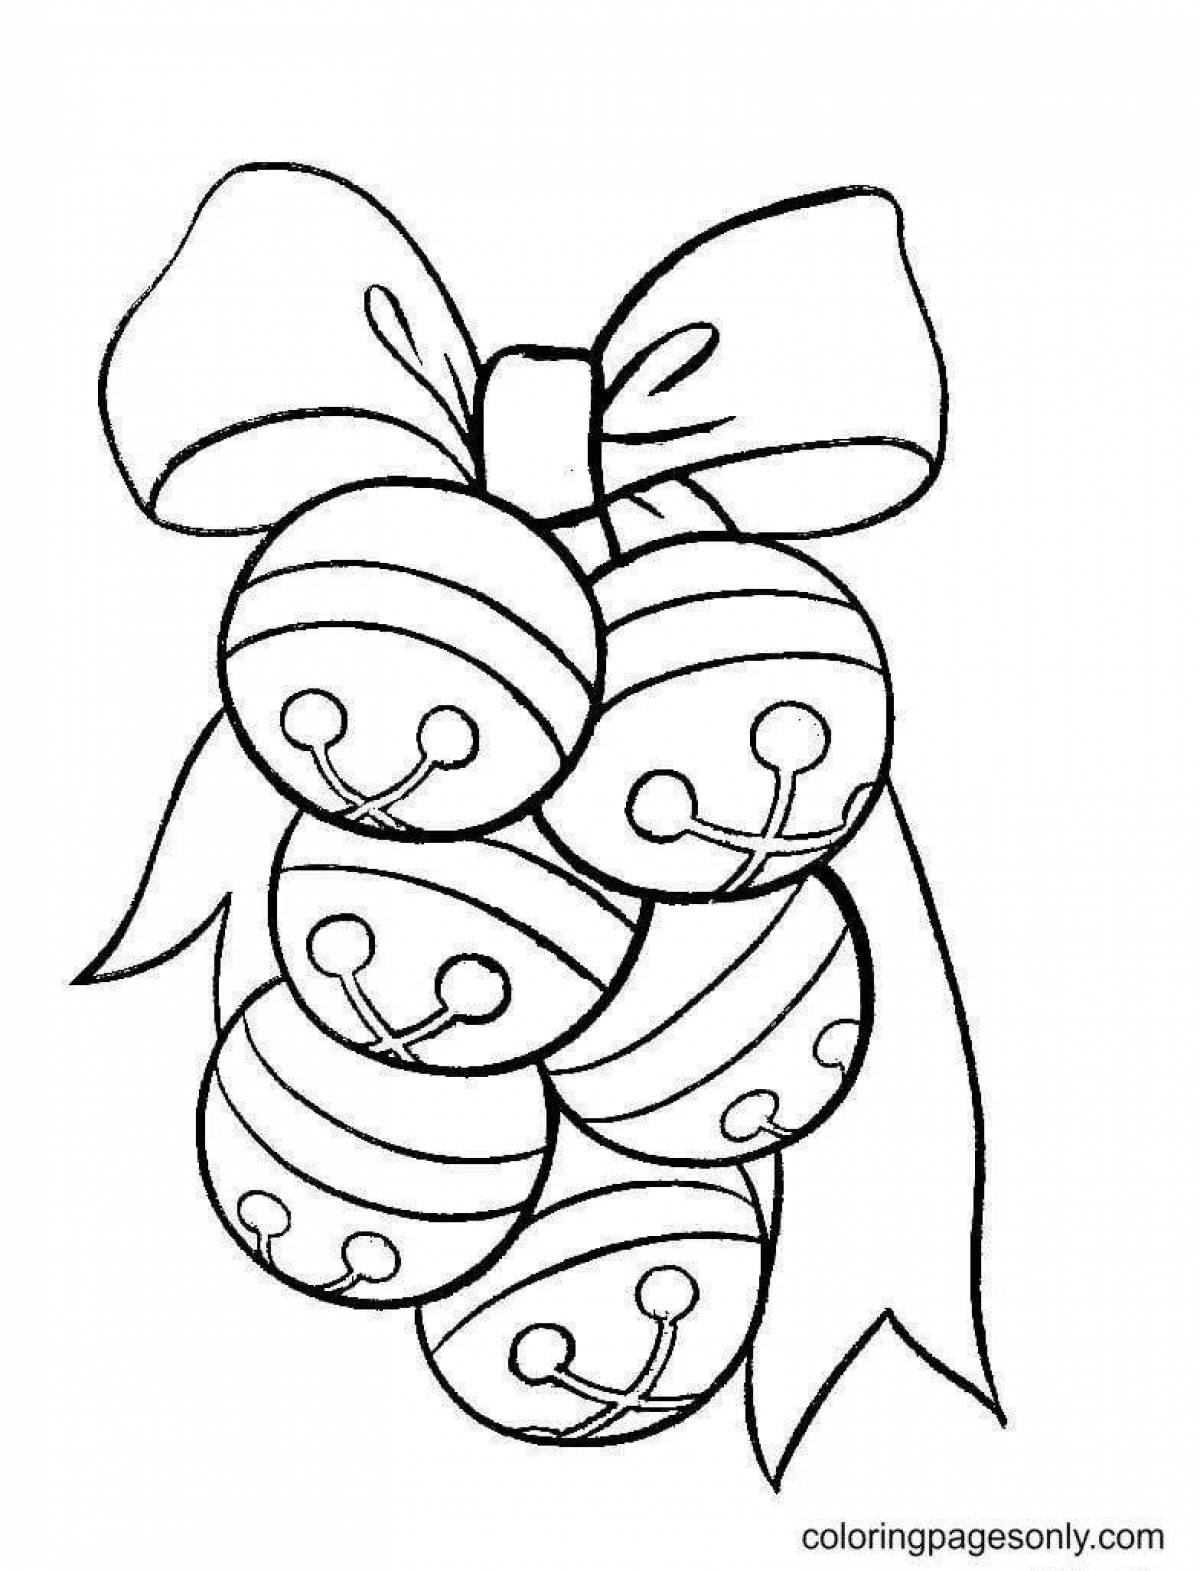 Lovely decorations for girls coloring book